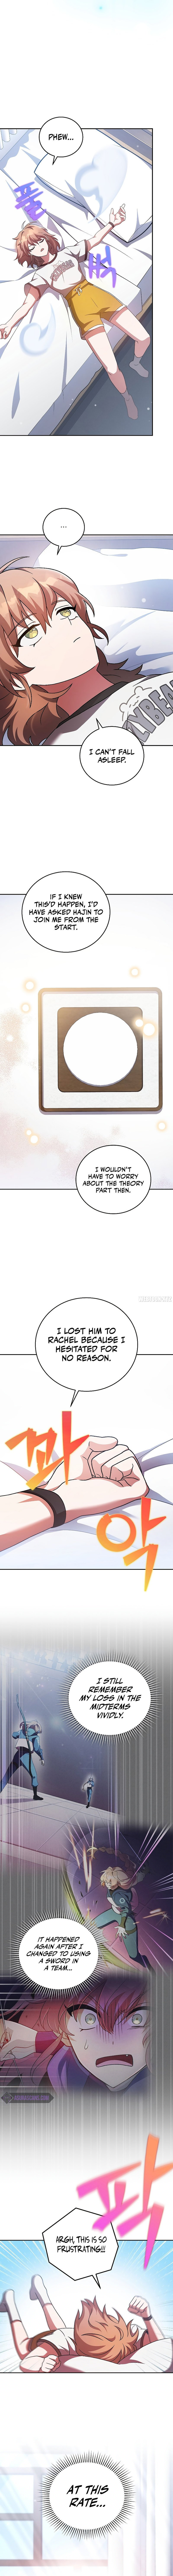 the-novels-extra-remake-chap-87-4